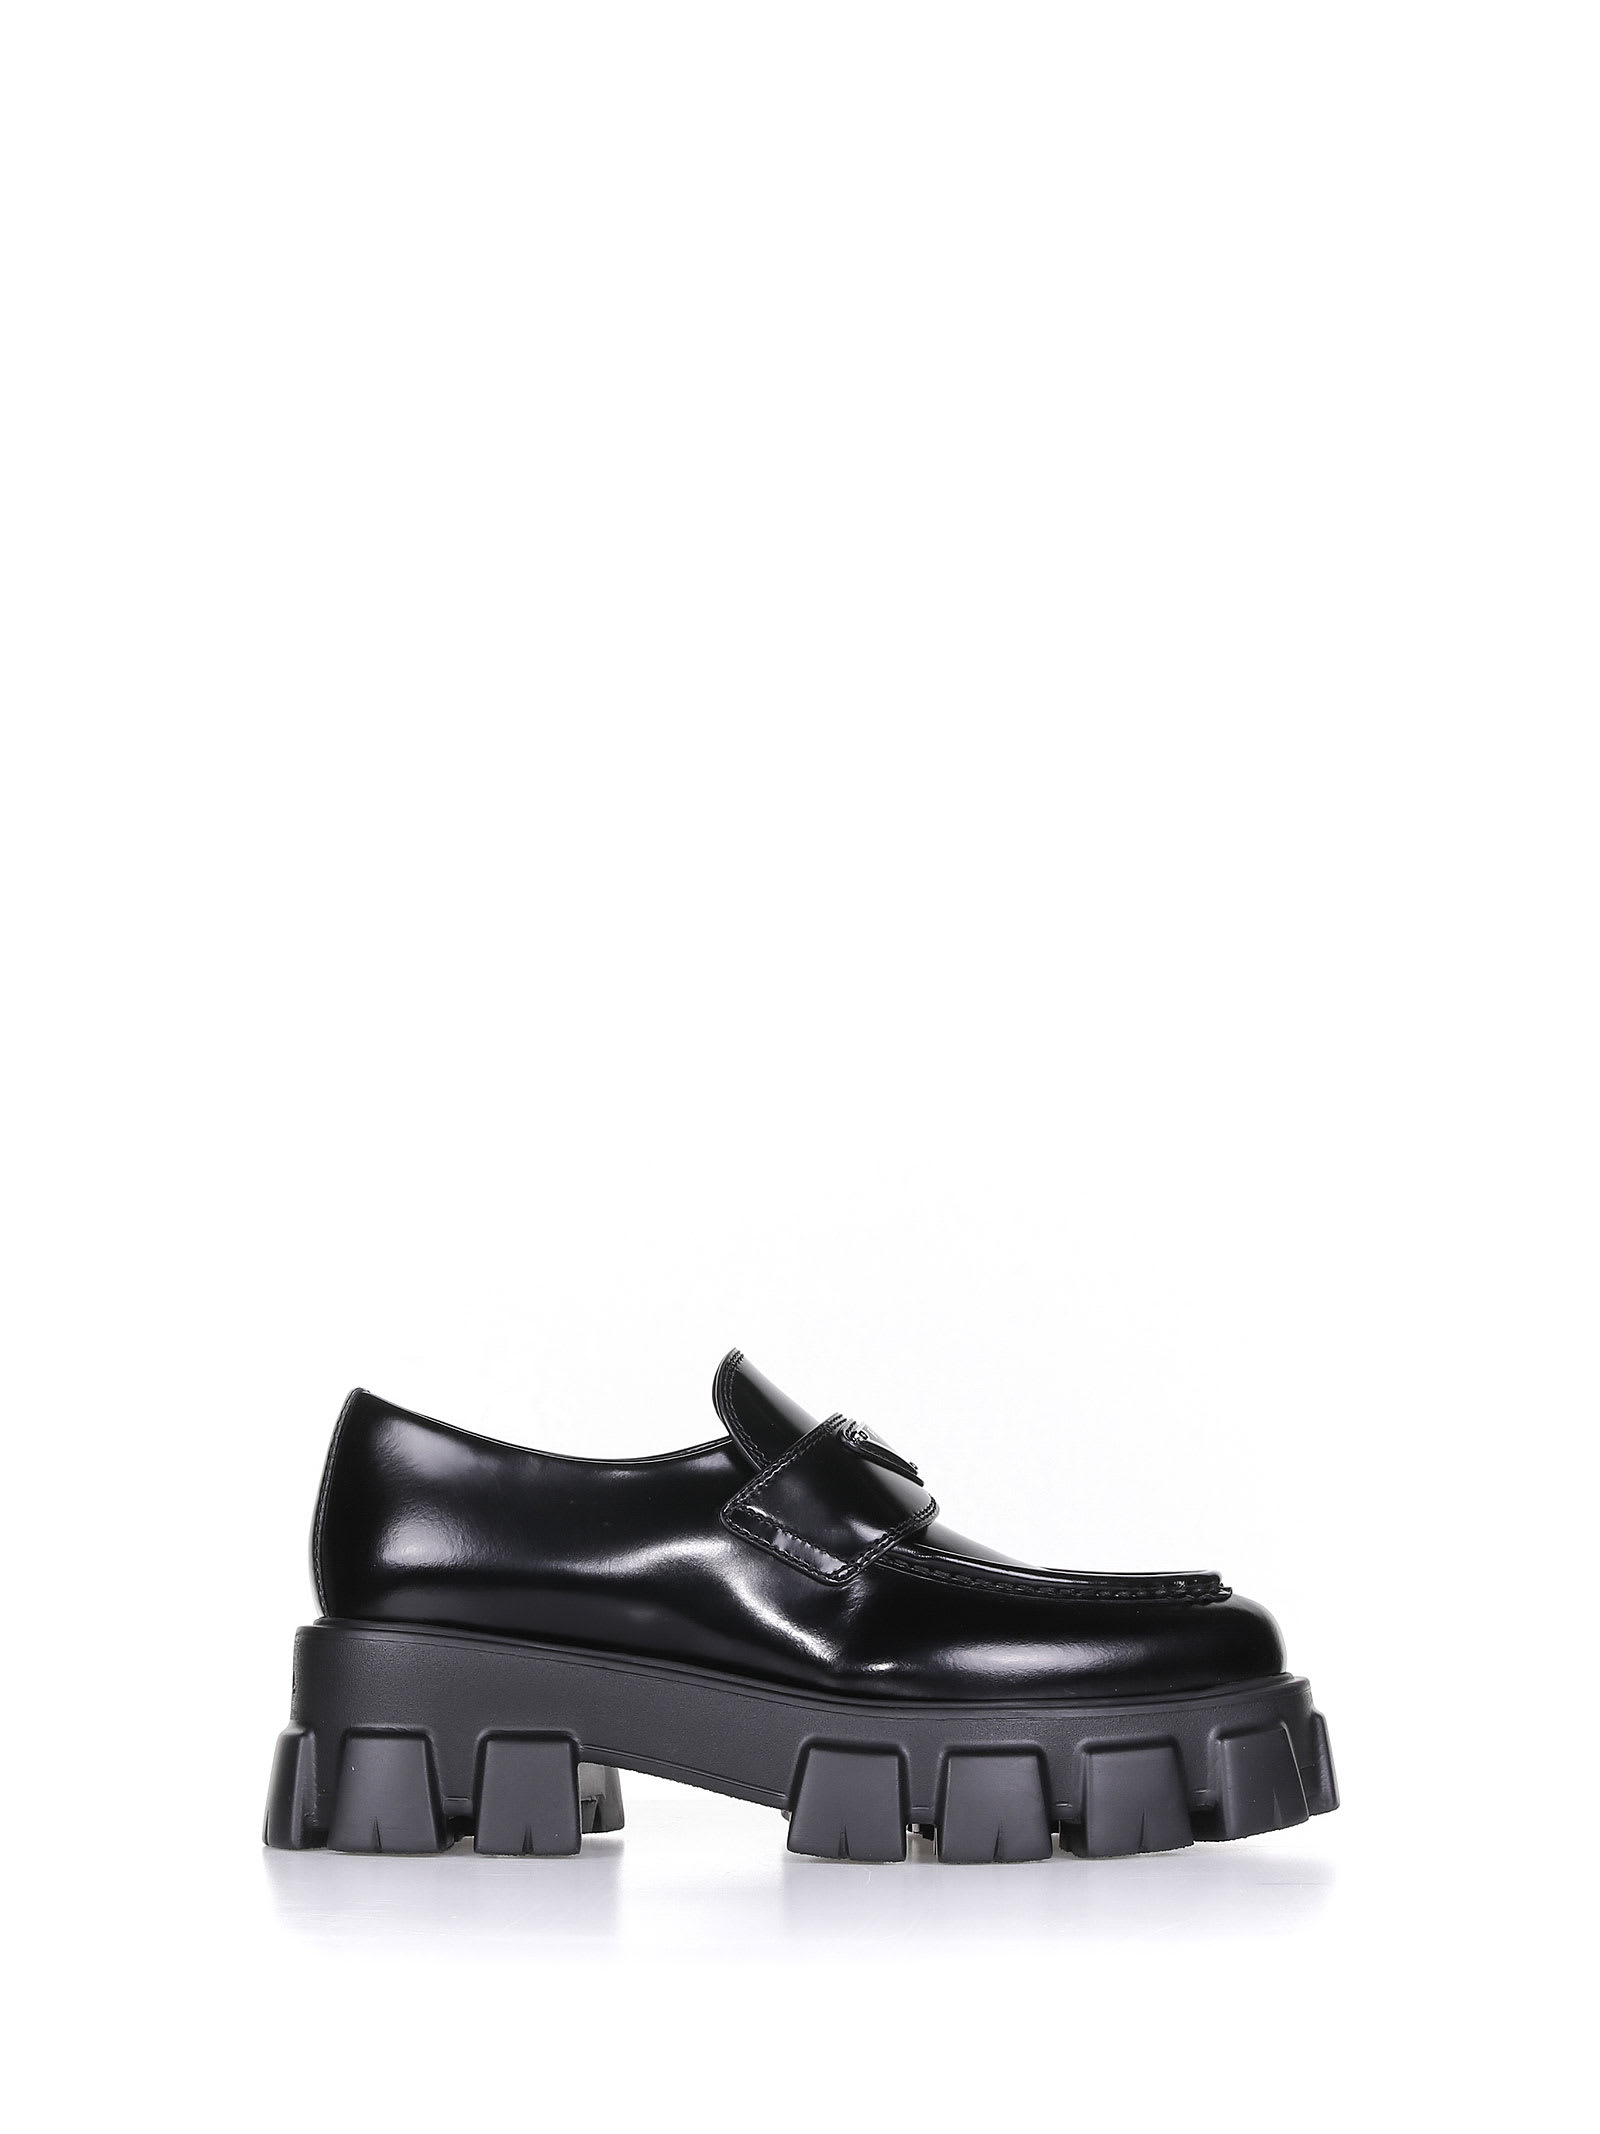 Prada Monolith Loafers In Black Leather